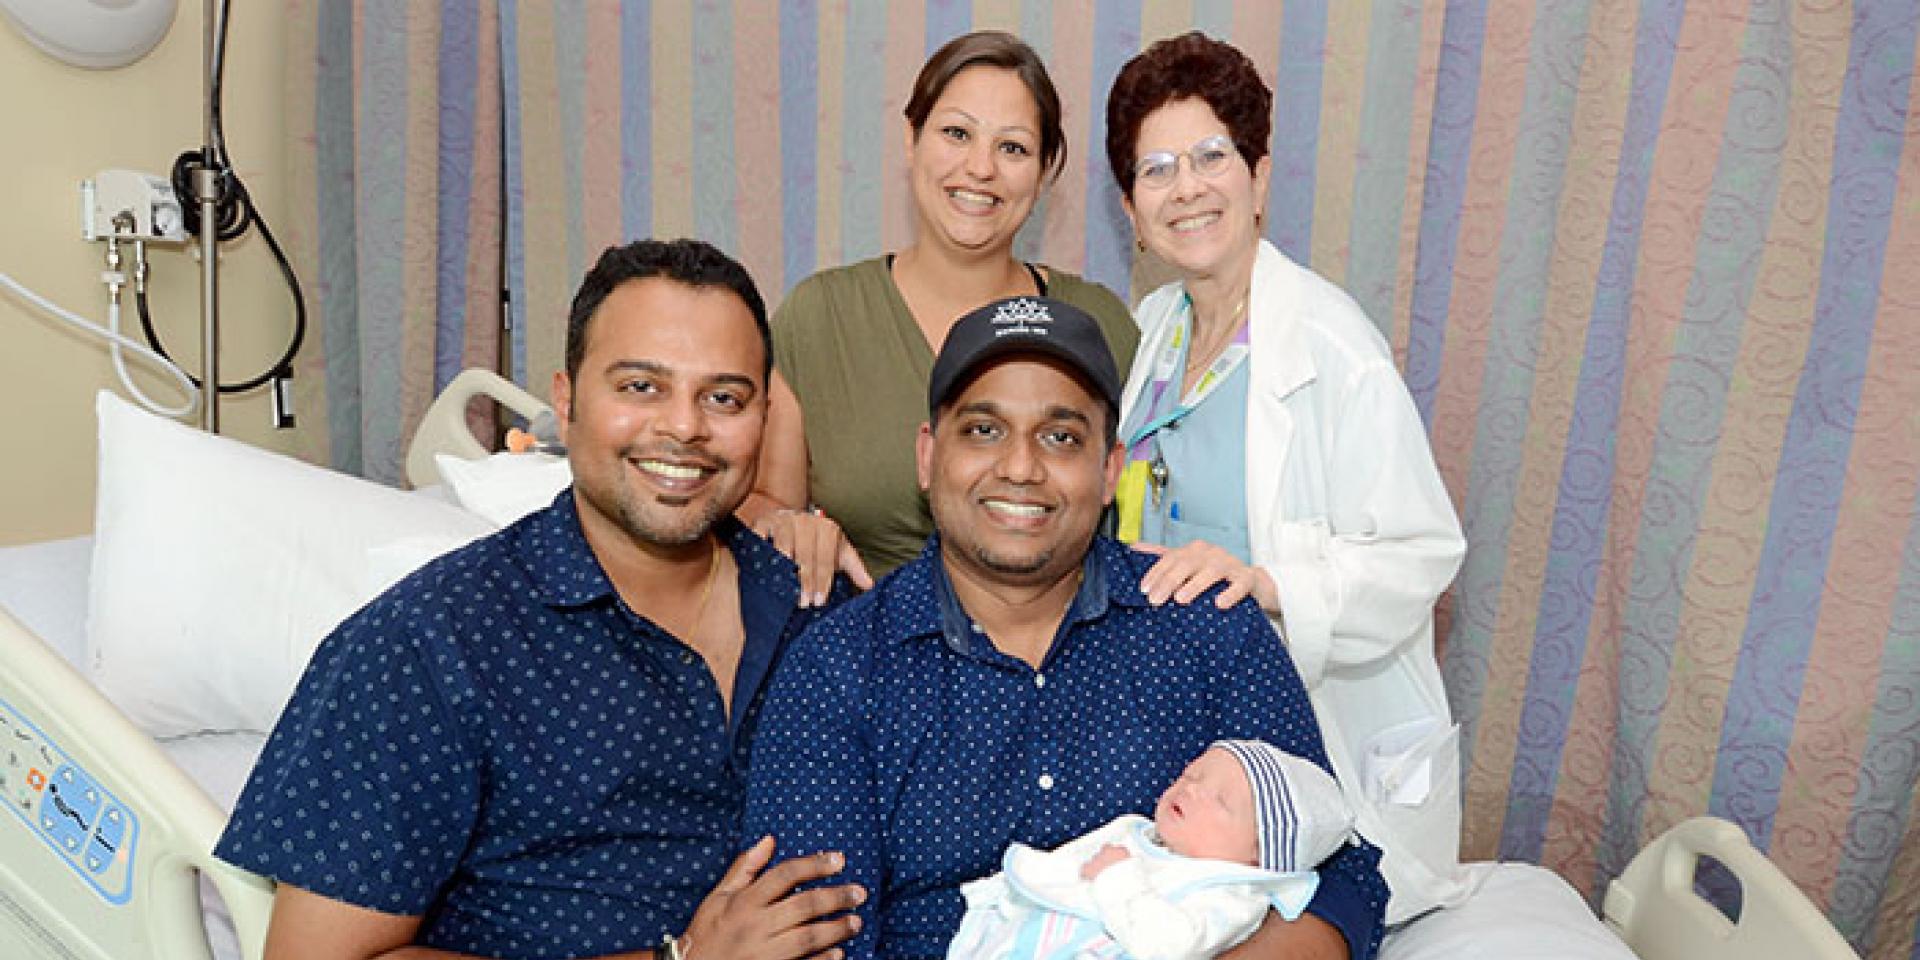 New parents Asish Purushan and Krishneel Lall with baby Sidharth, surrogate Mazyline McCarthy and obstetrician and gynecologist Dr. Brenda Woods